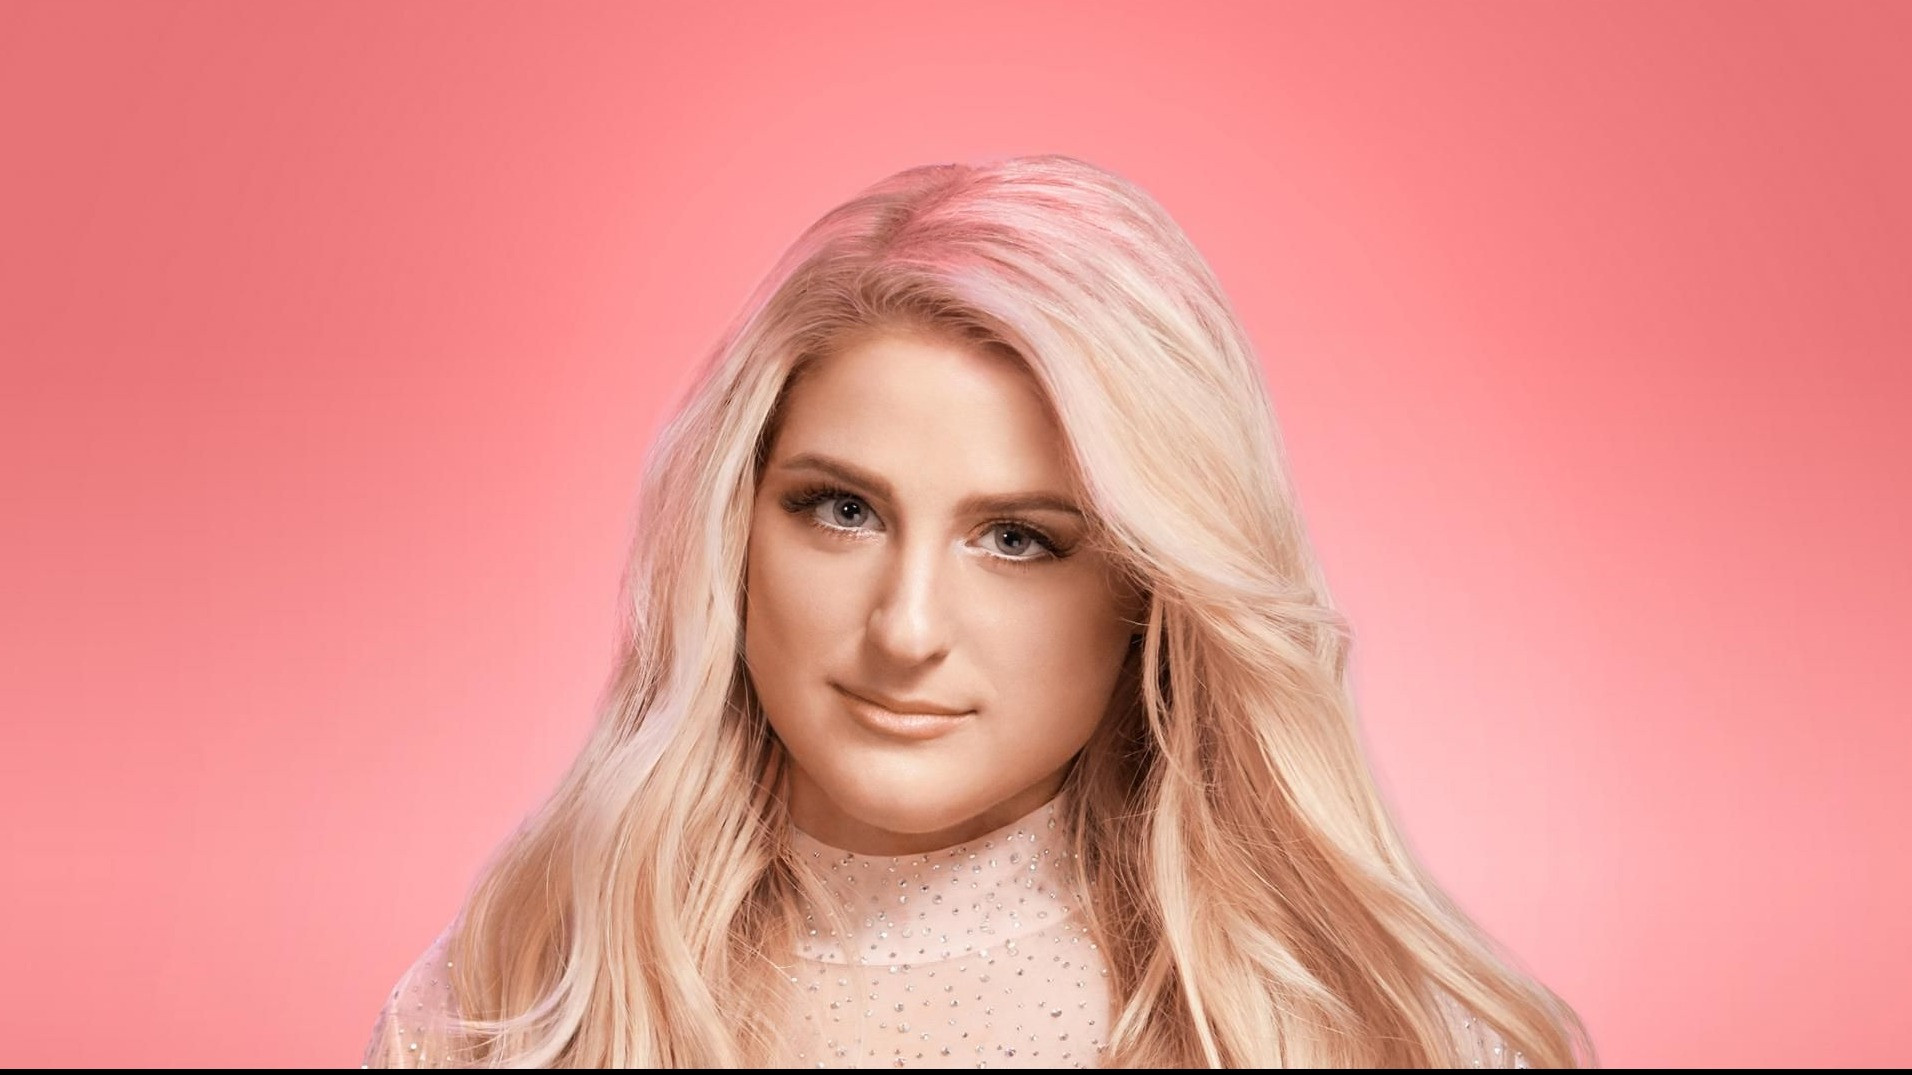 Lirik Lagu Made You Look - Meghan Trainor, 'I Could Have My Gucci On I  Could Wear My Louis Vuitton